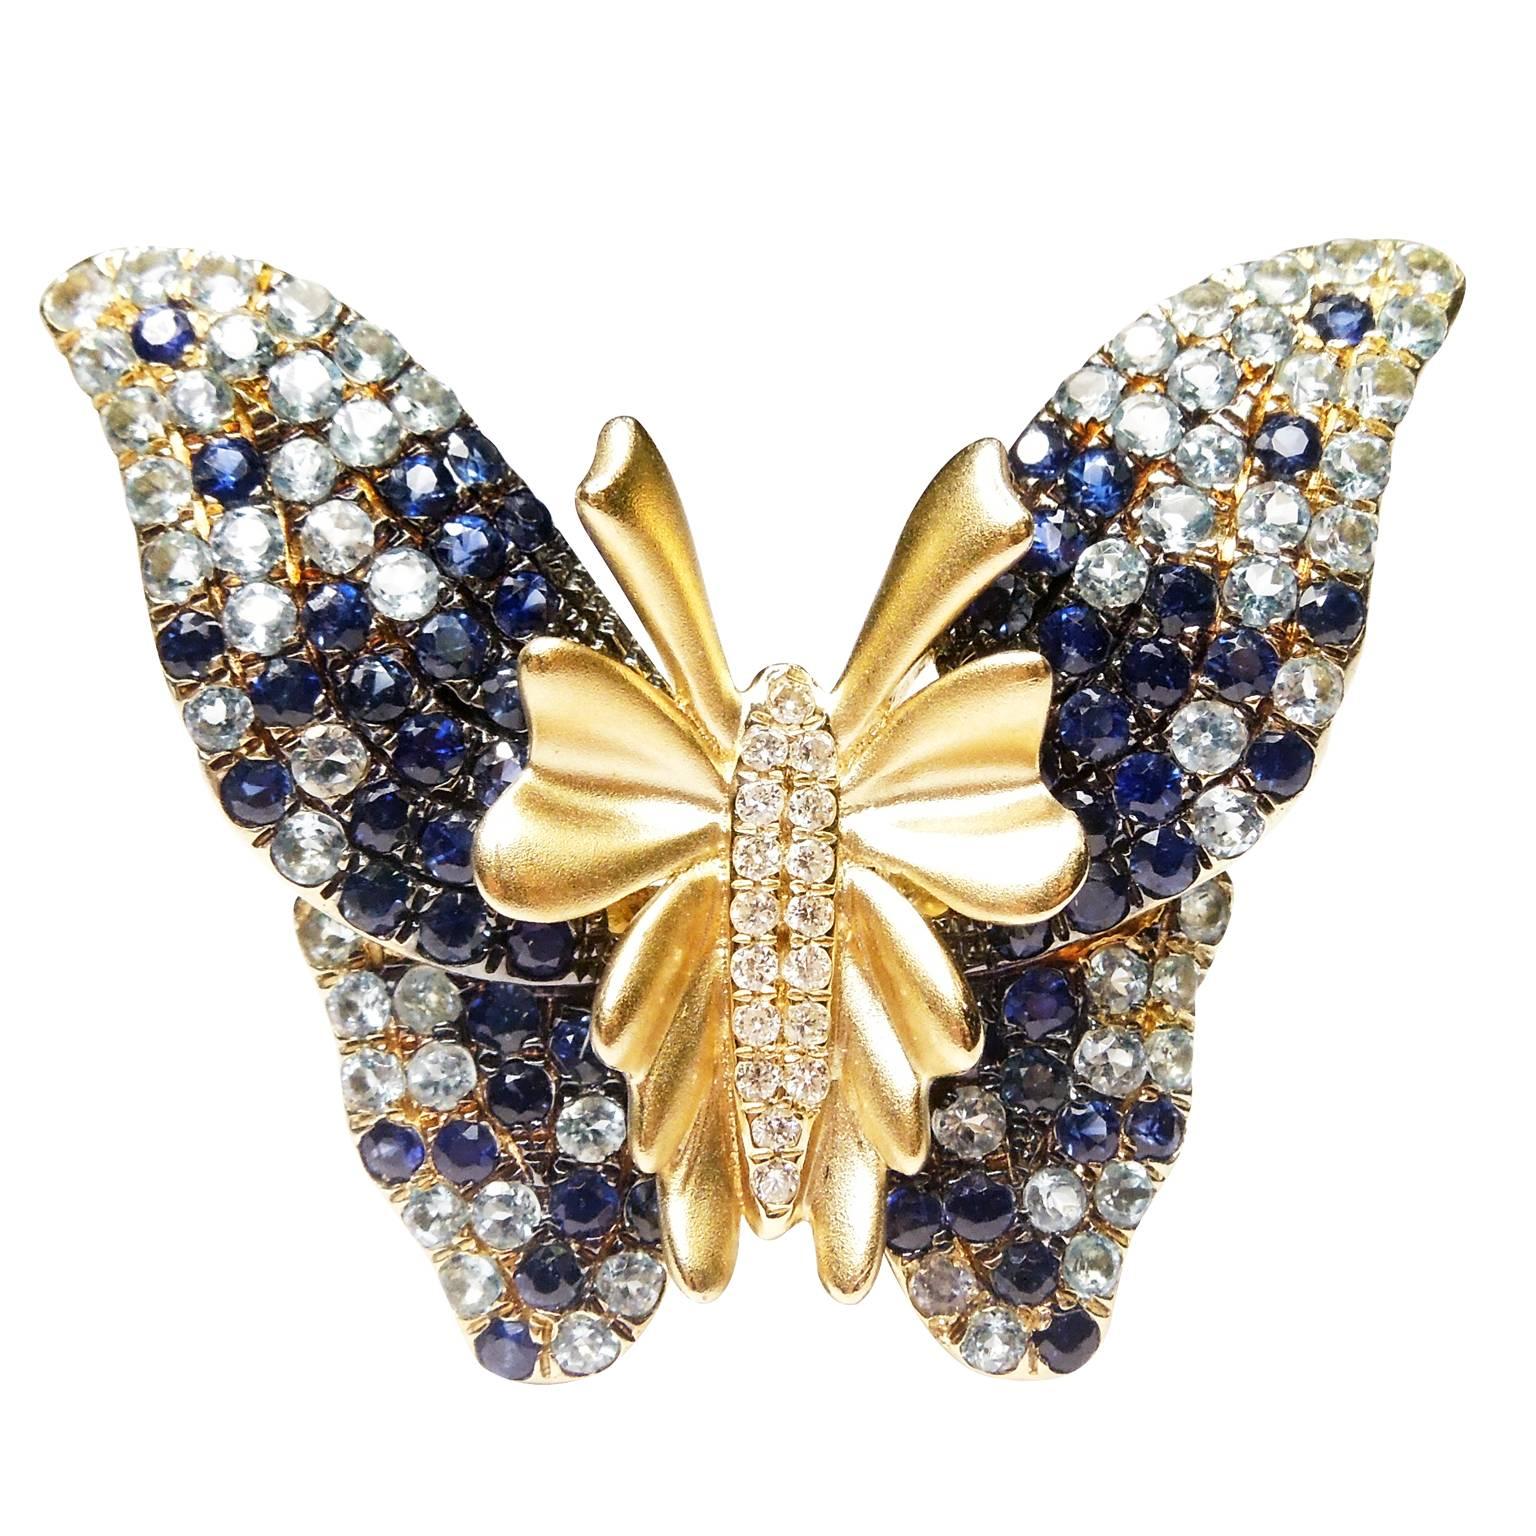 14K Yellow Gold Ring with Shaded Blue Sapphires and Diamonds

0.15ct. Diamonds throughout face

Diamonds are shaded from from dark blue to light.

Butterfly is 1.4 inch width x 1.2 inch length

8.6g 14K Gold

Currently size 6.5. Can be sized.

Estate